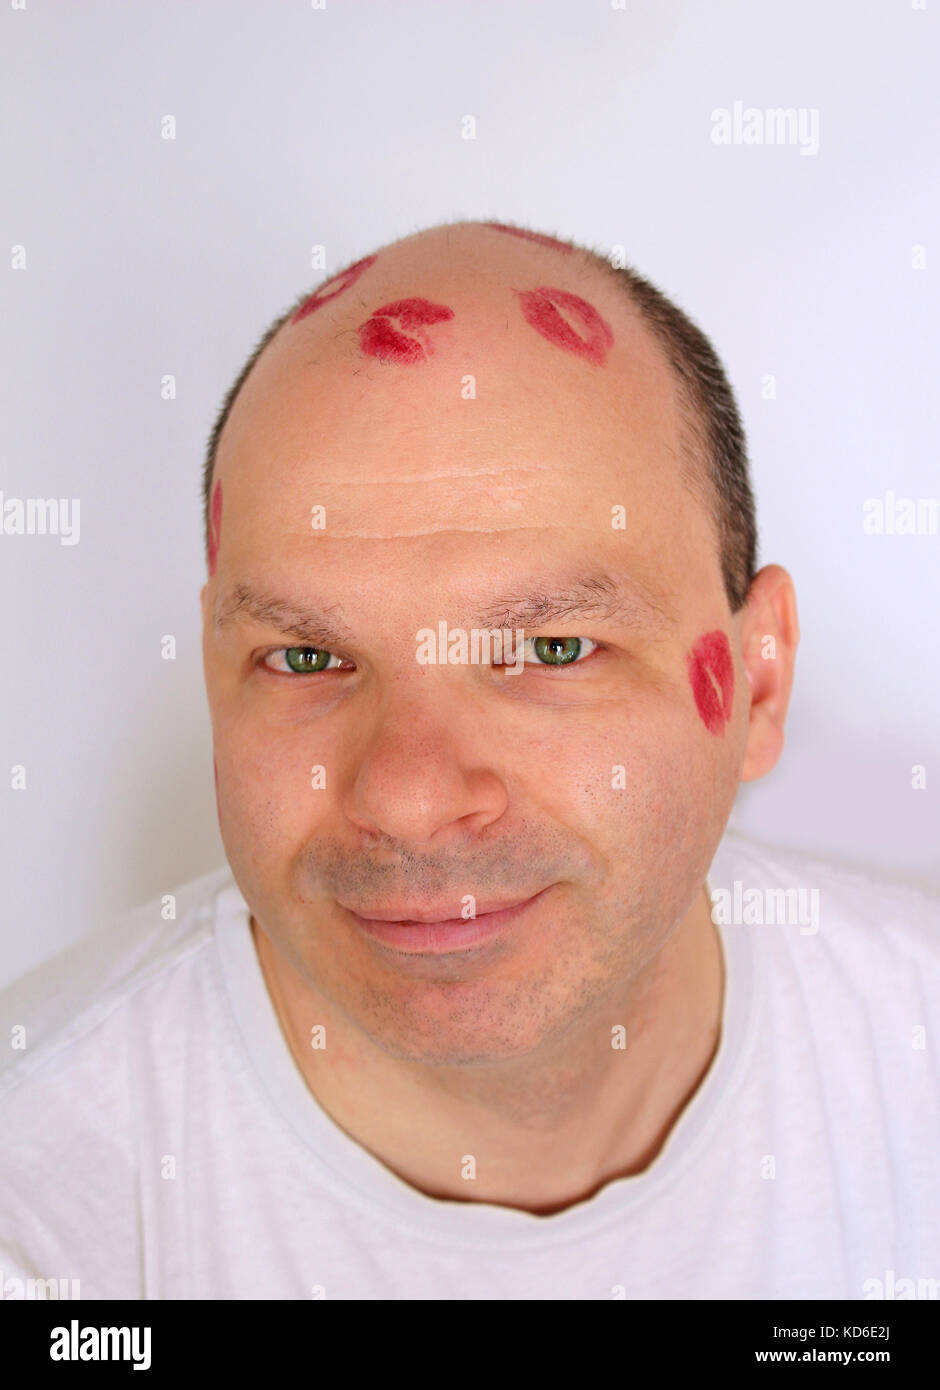 Young man with lipstick kisses marks on bald head Stock Photo